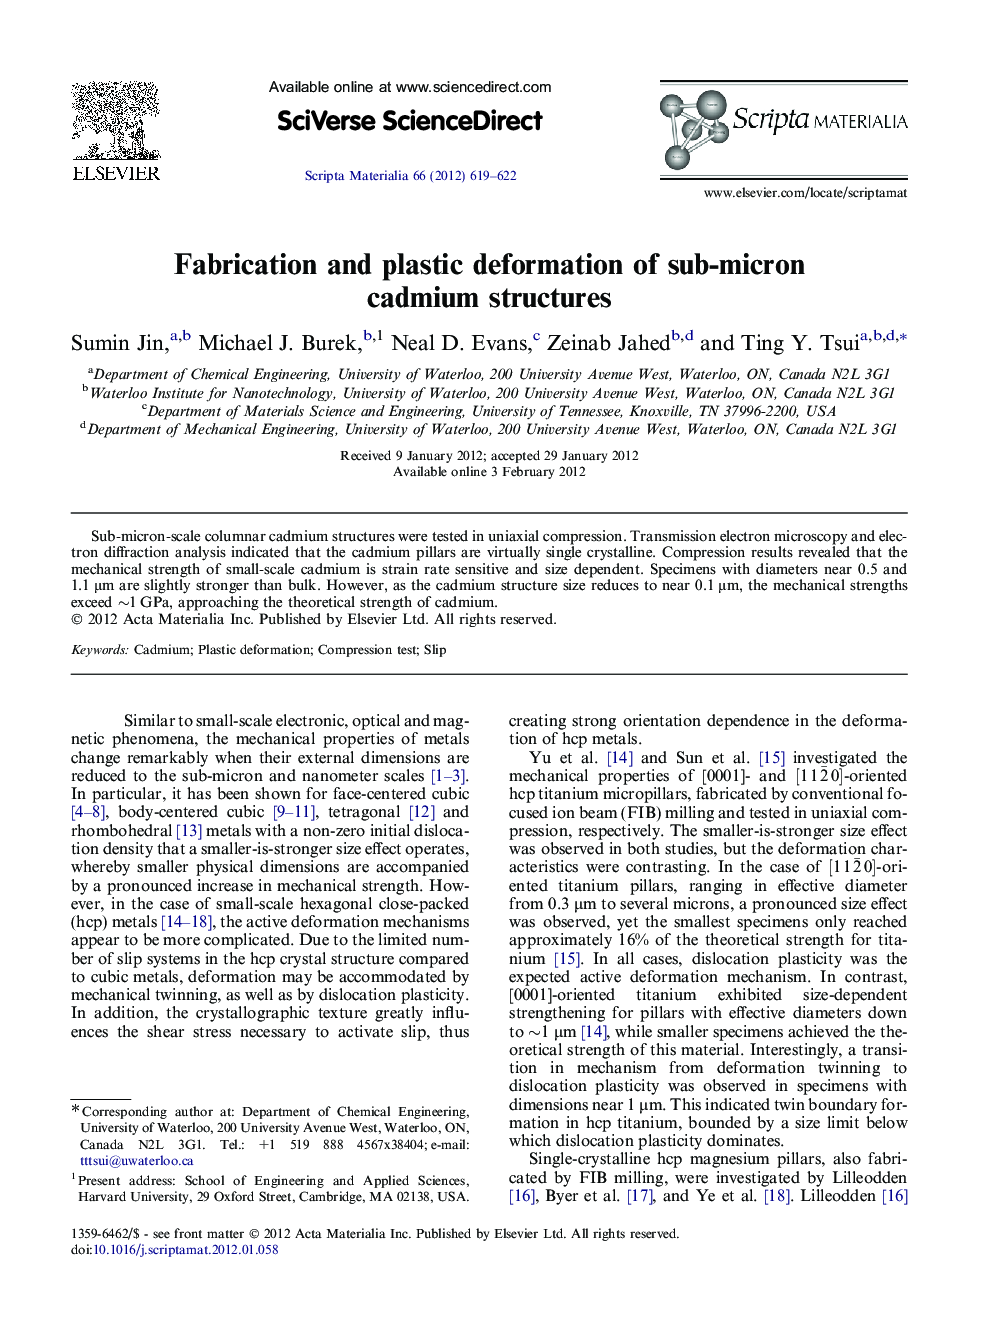 Fabrication and plastic deformation of sub-micron cadmium structures